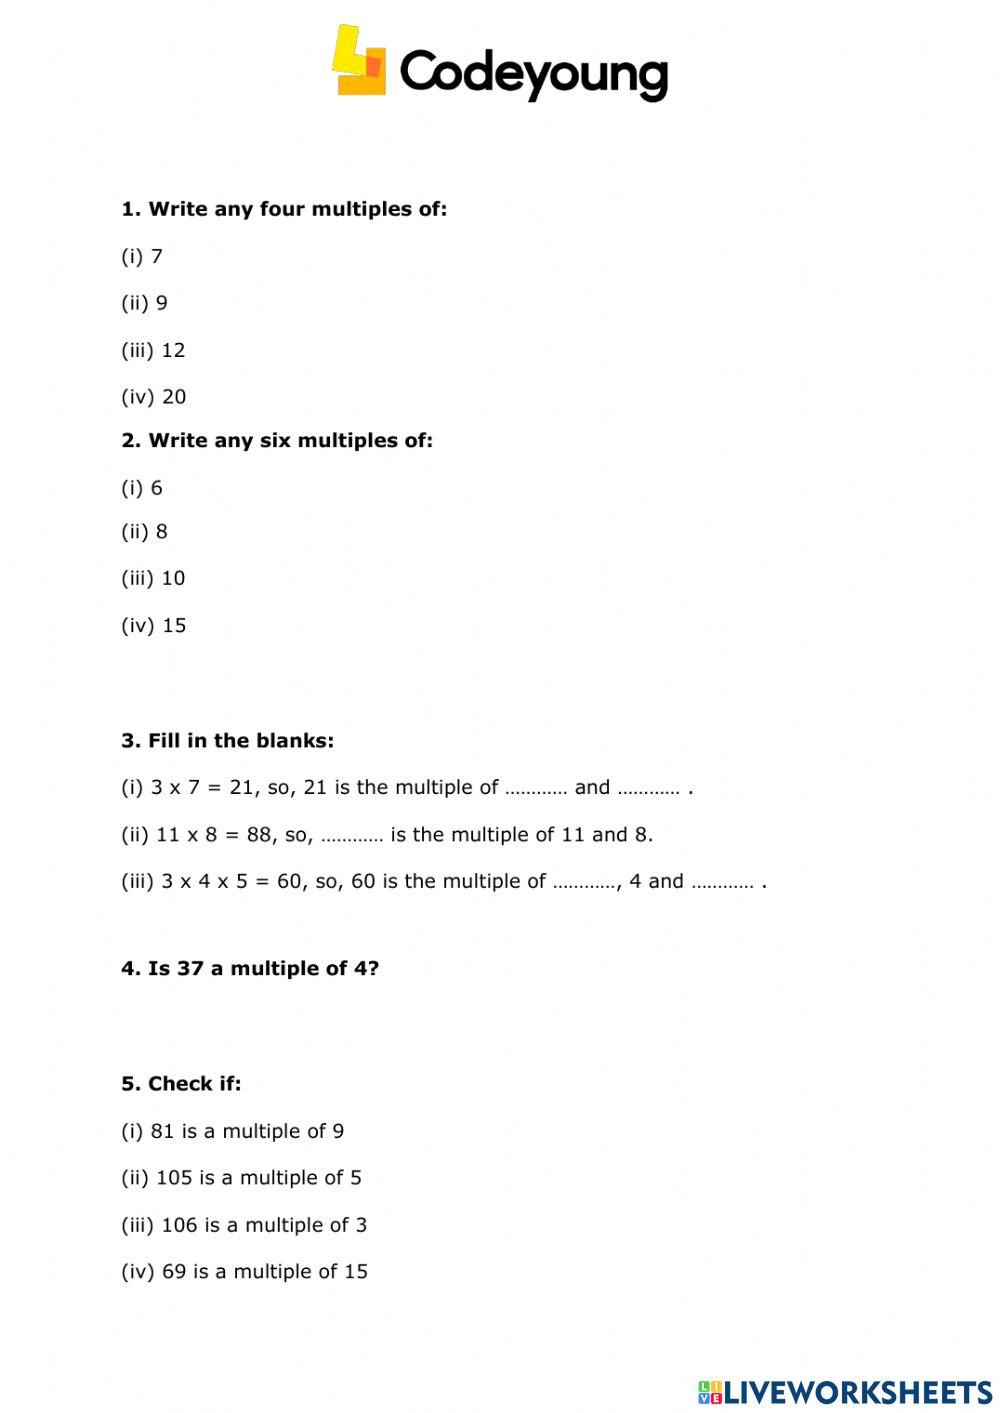 Factors and Multiples Concept CW